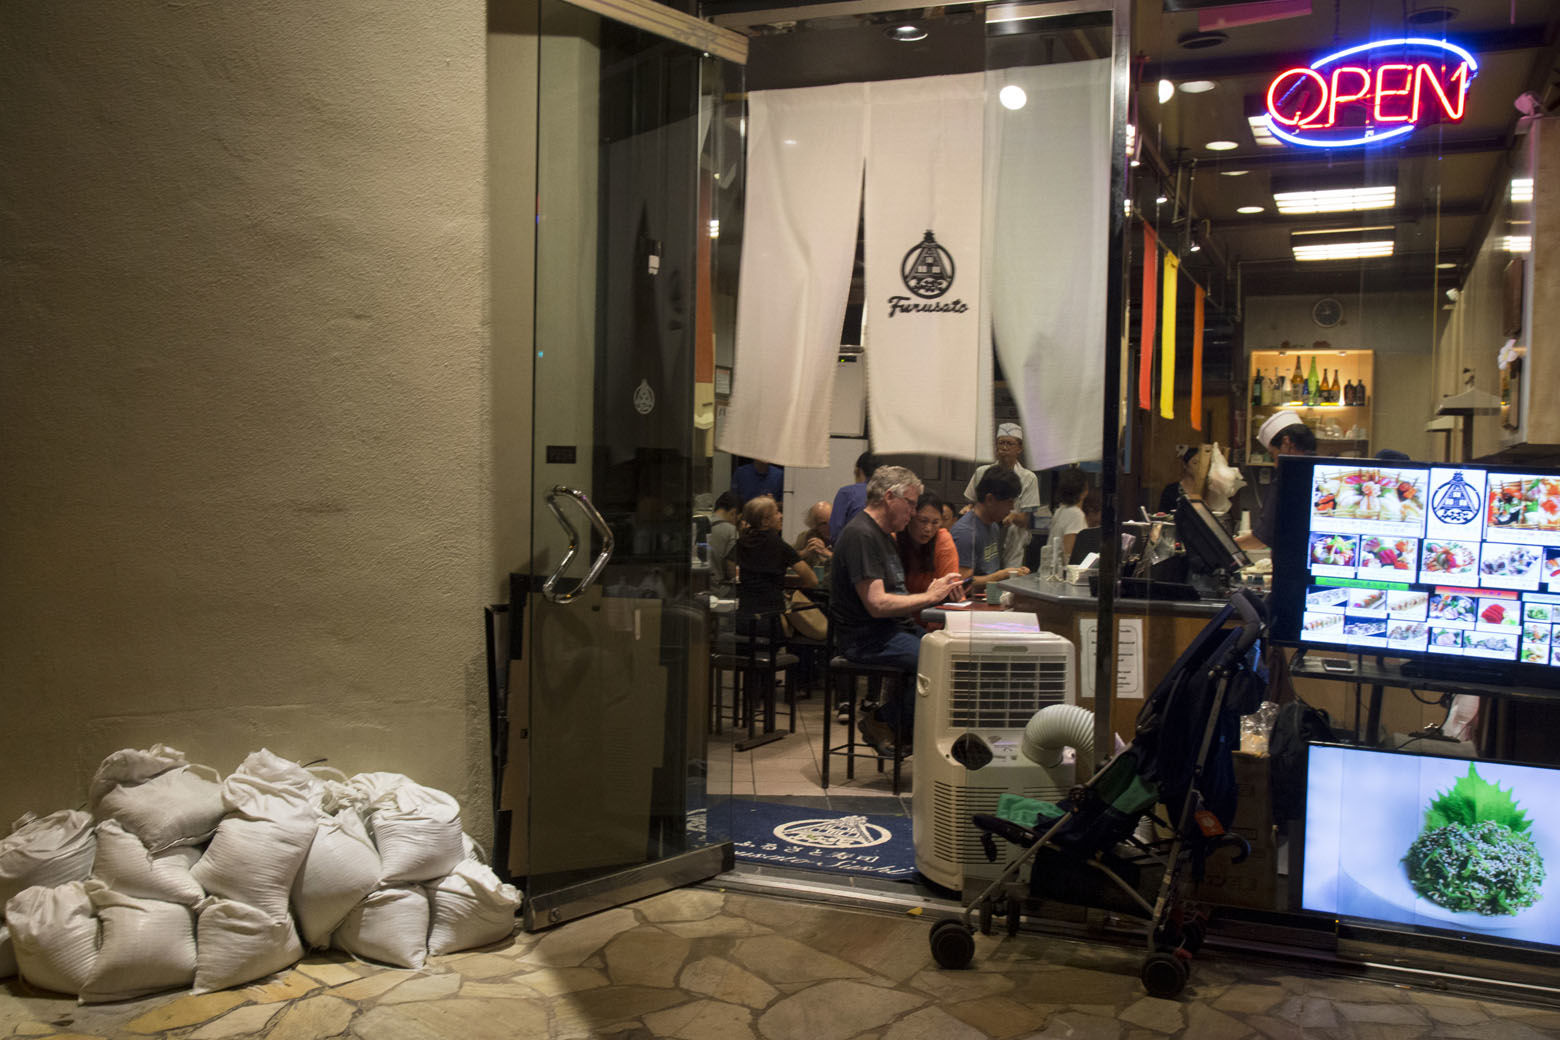 HONOLULU, HI - AUGUST 23: 2018   Furusato restaurant in the Hyatt Regency stayed open late but prepared sand bags to protect their Kalakaua Avenue store from flooding as Hurricane Lane approaches Waikiki Beach on Thursday, August 23, 2018 in Honolulu, Hi.  
(Photo by Kat Wade/Getty Images)